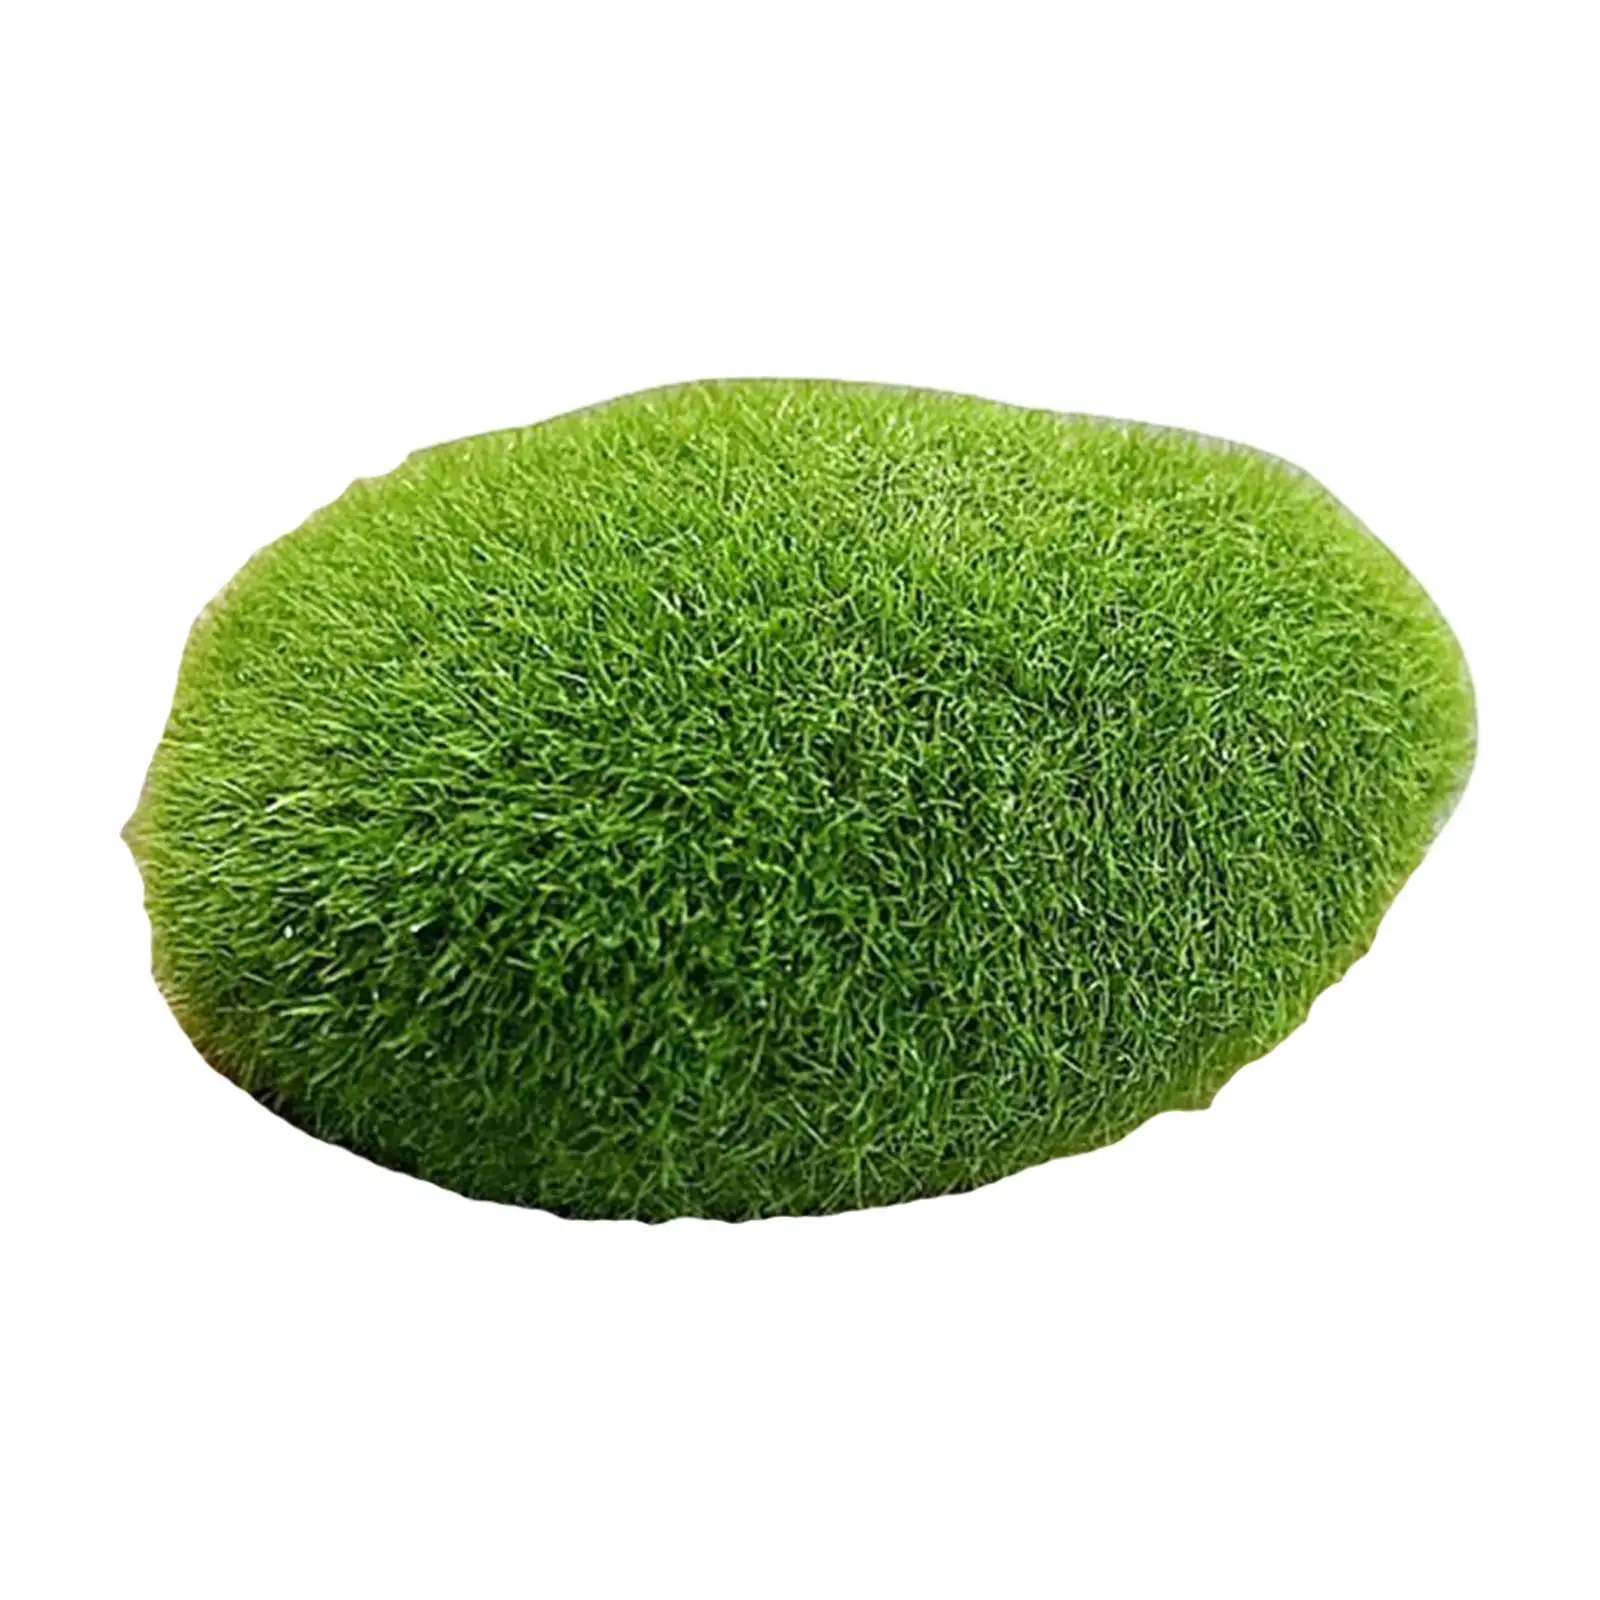 Artificial Moss Rock Green Moss Covered Stone for Hotel Floral Arrangements